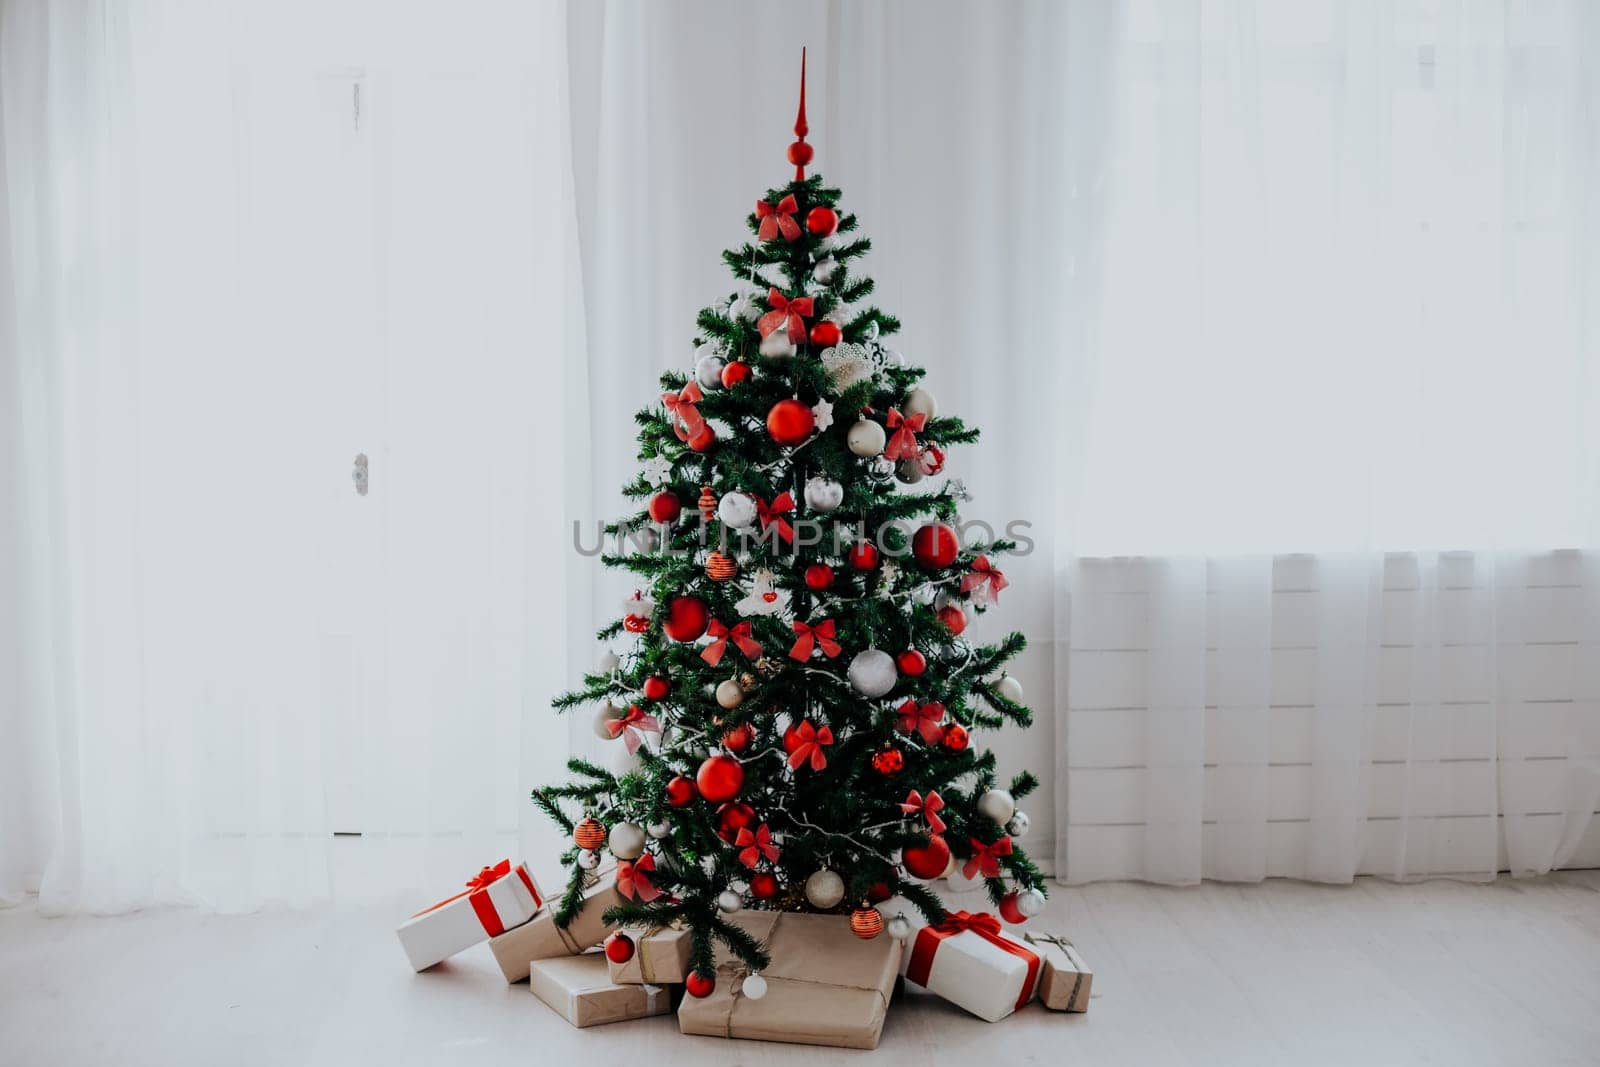 Christmas tree with red decorations new year gifts 2018